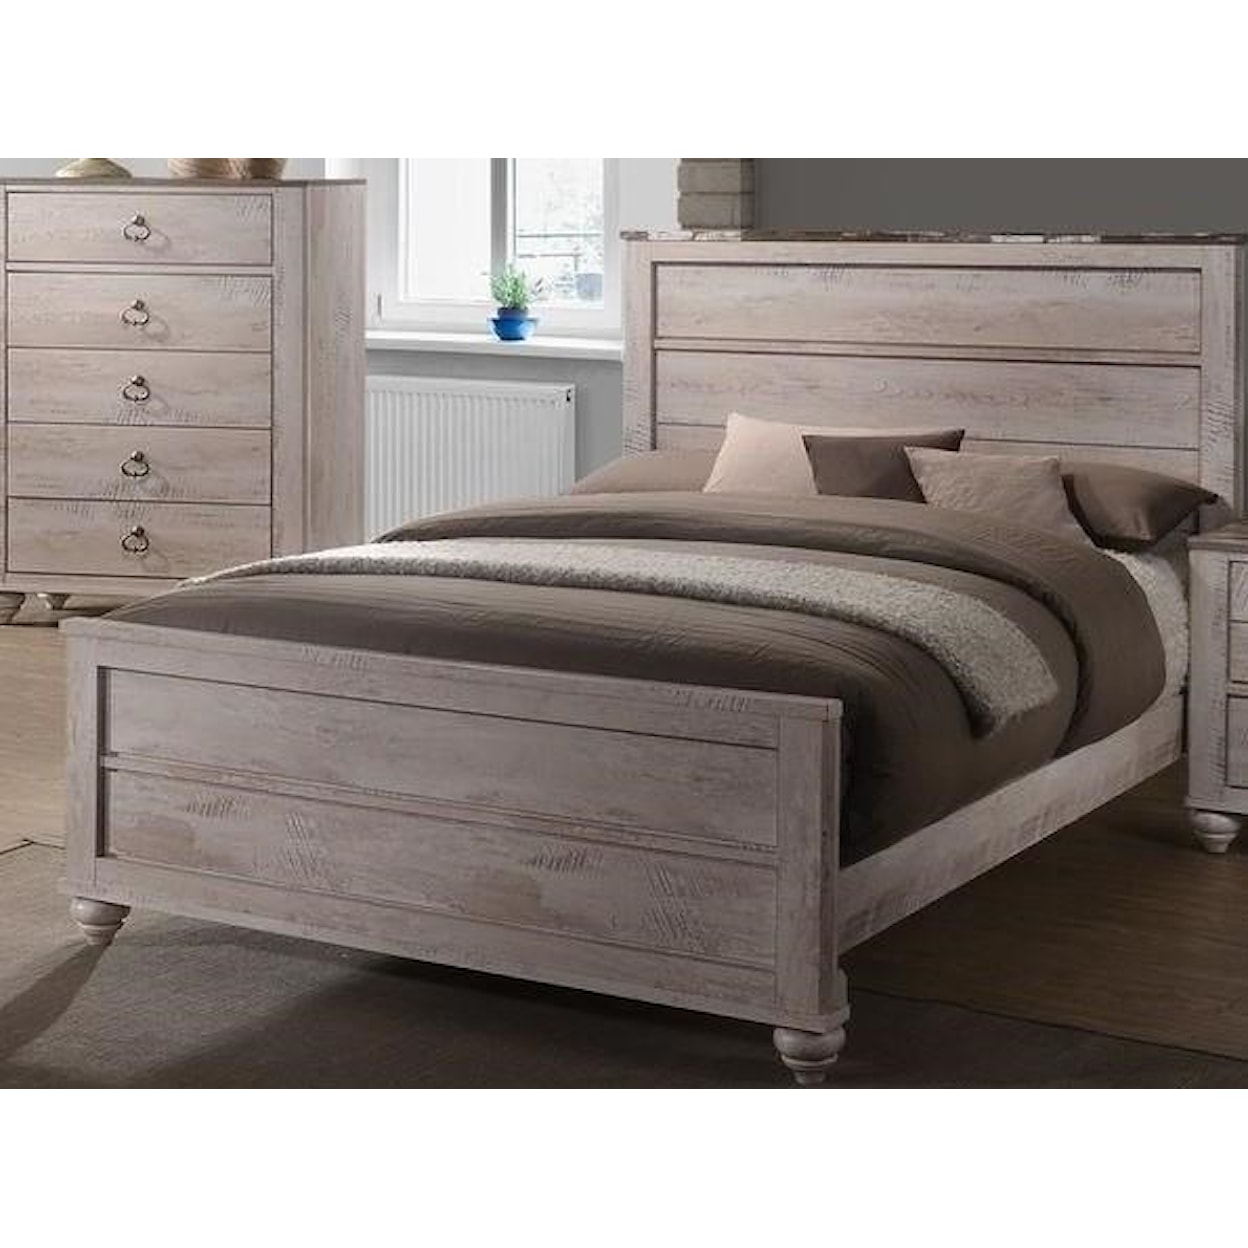 Lifestyle C7302A Twin Bed